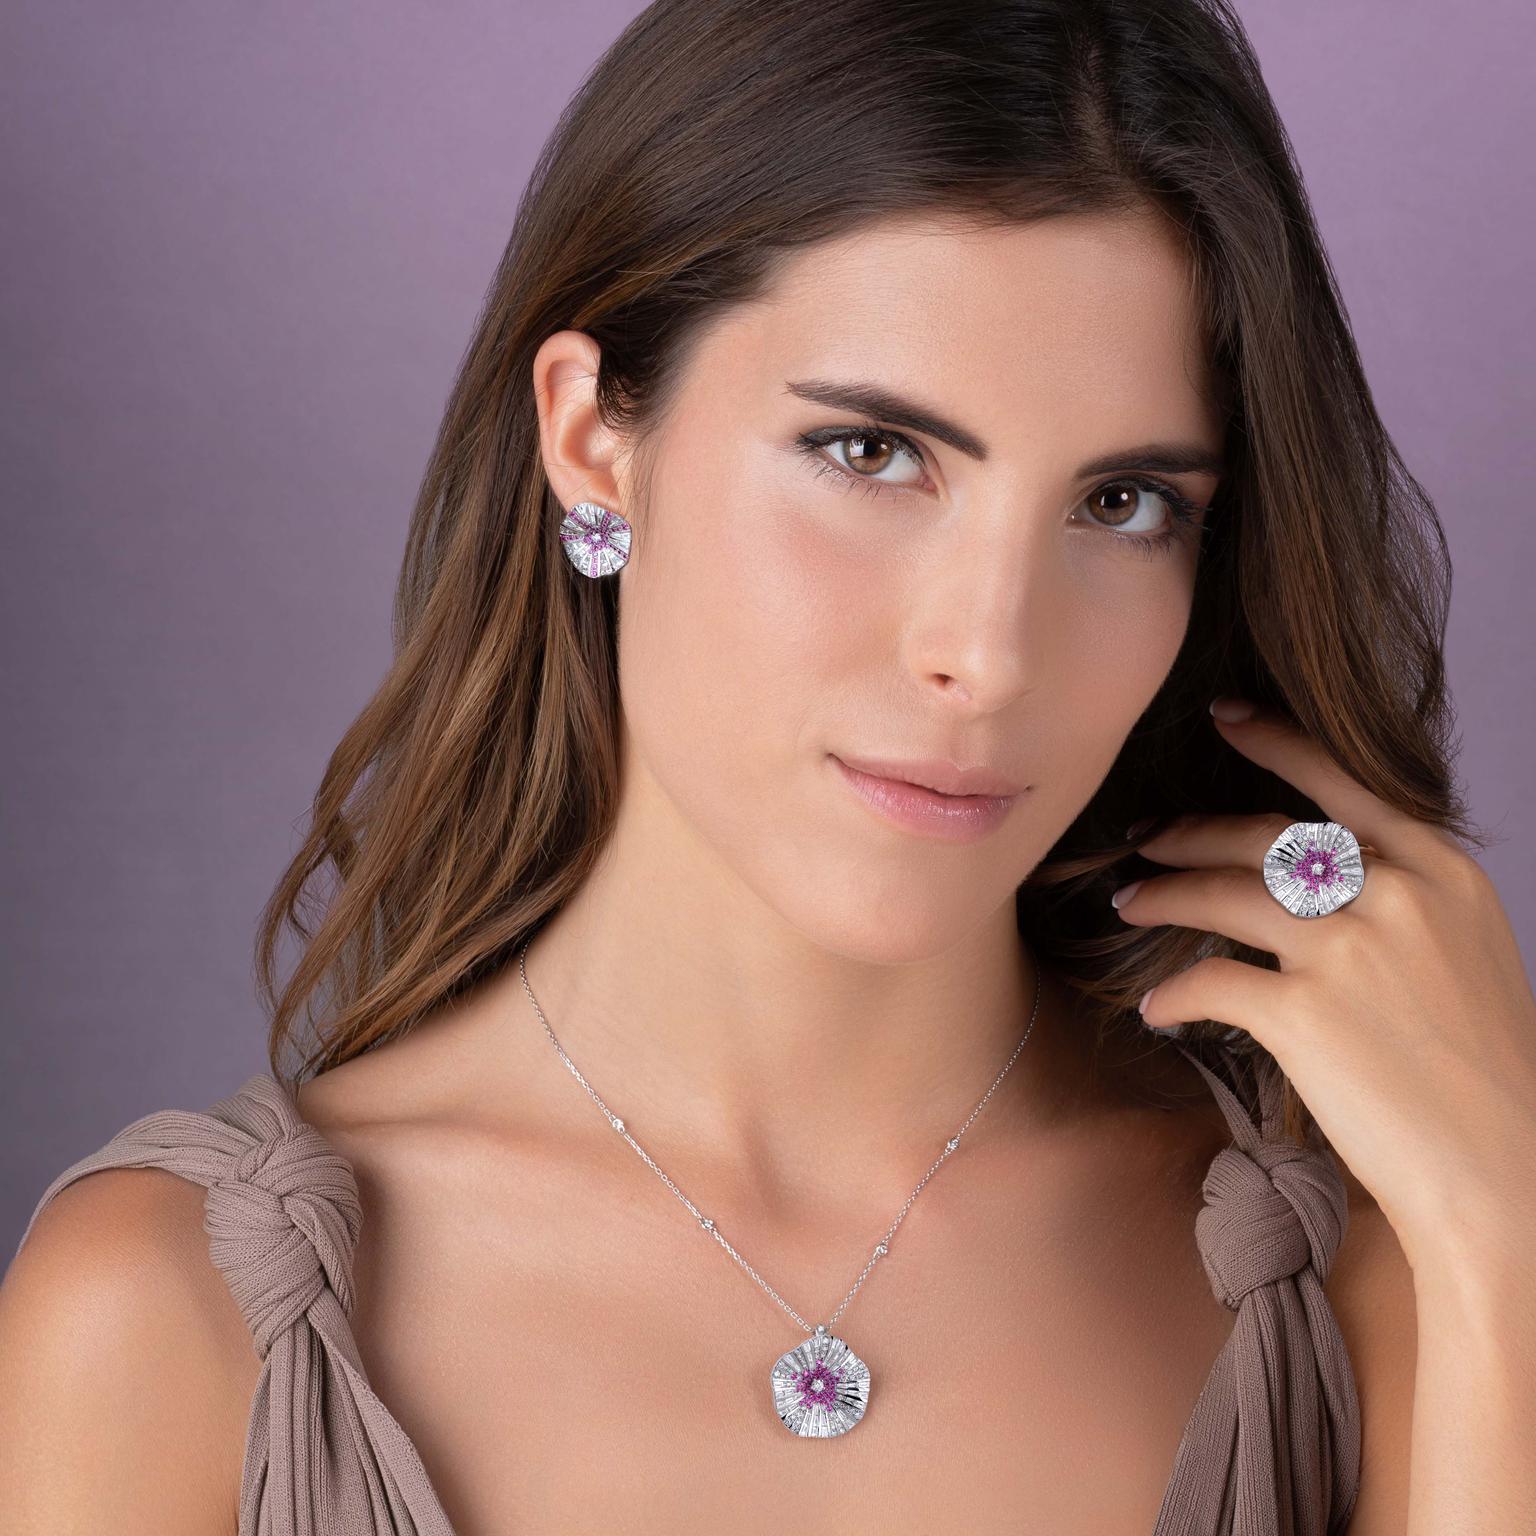 Stenzhorn Belle pink sapphire and white diamond ring, necklace and earrings on model